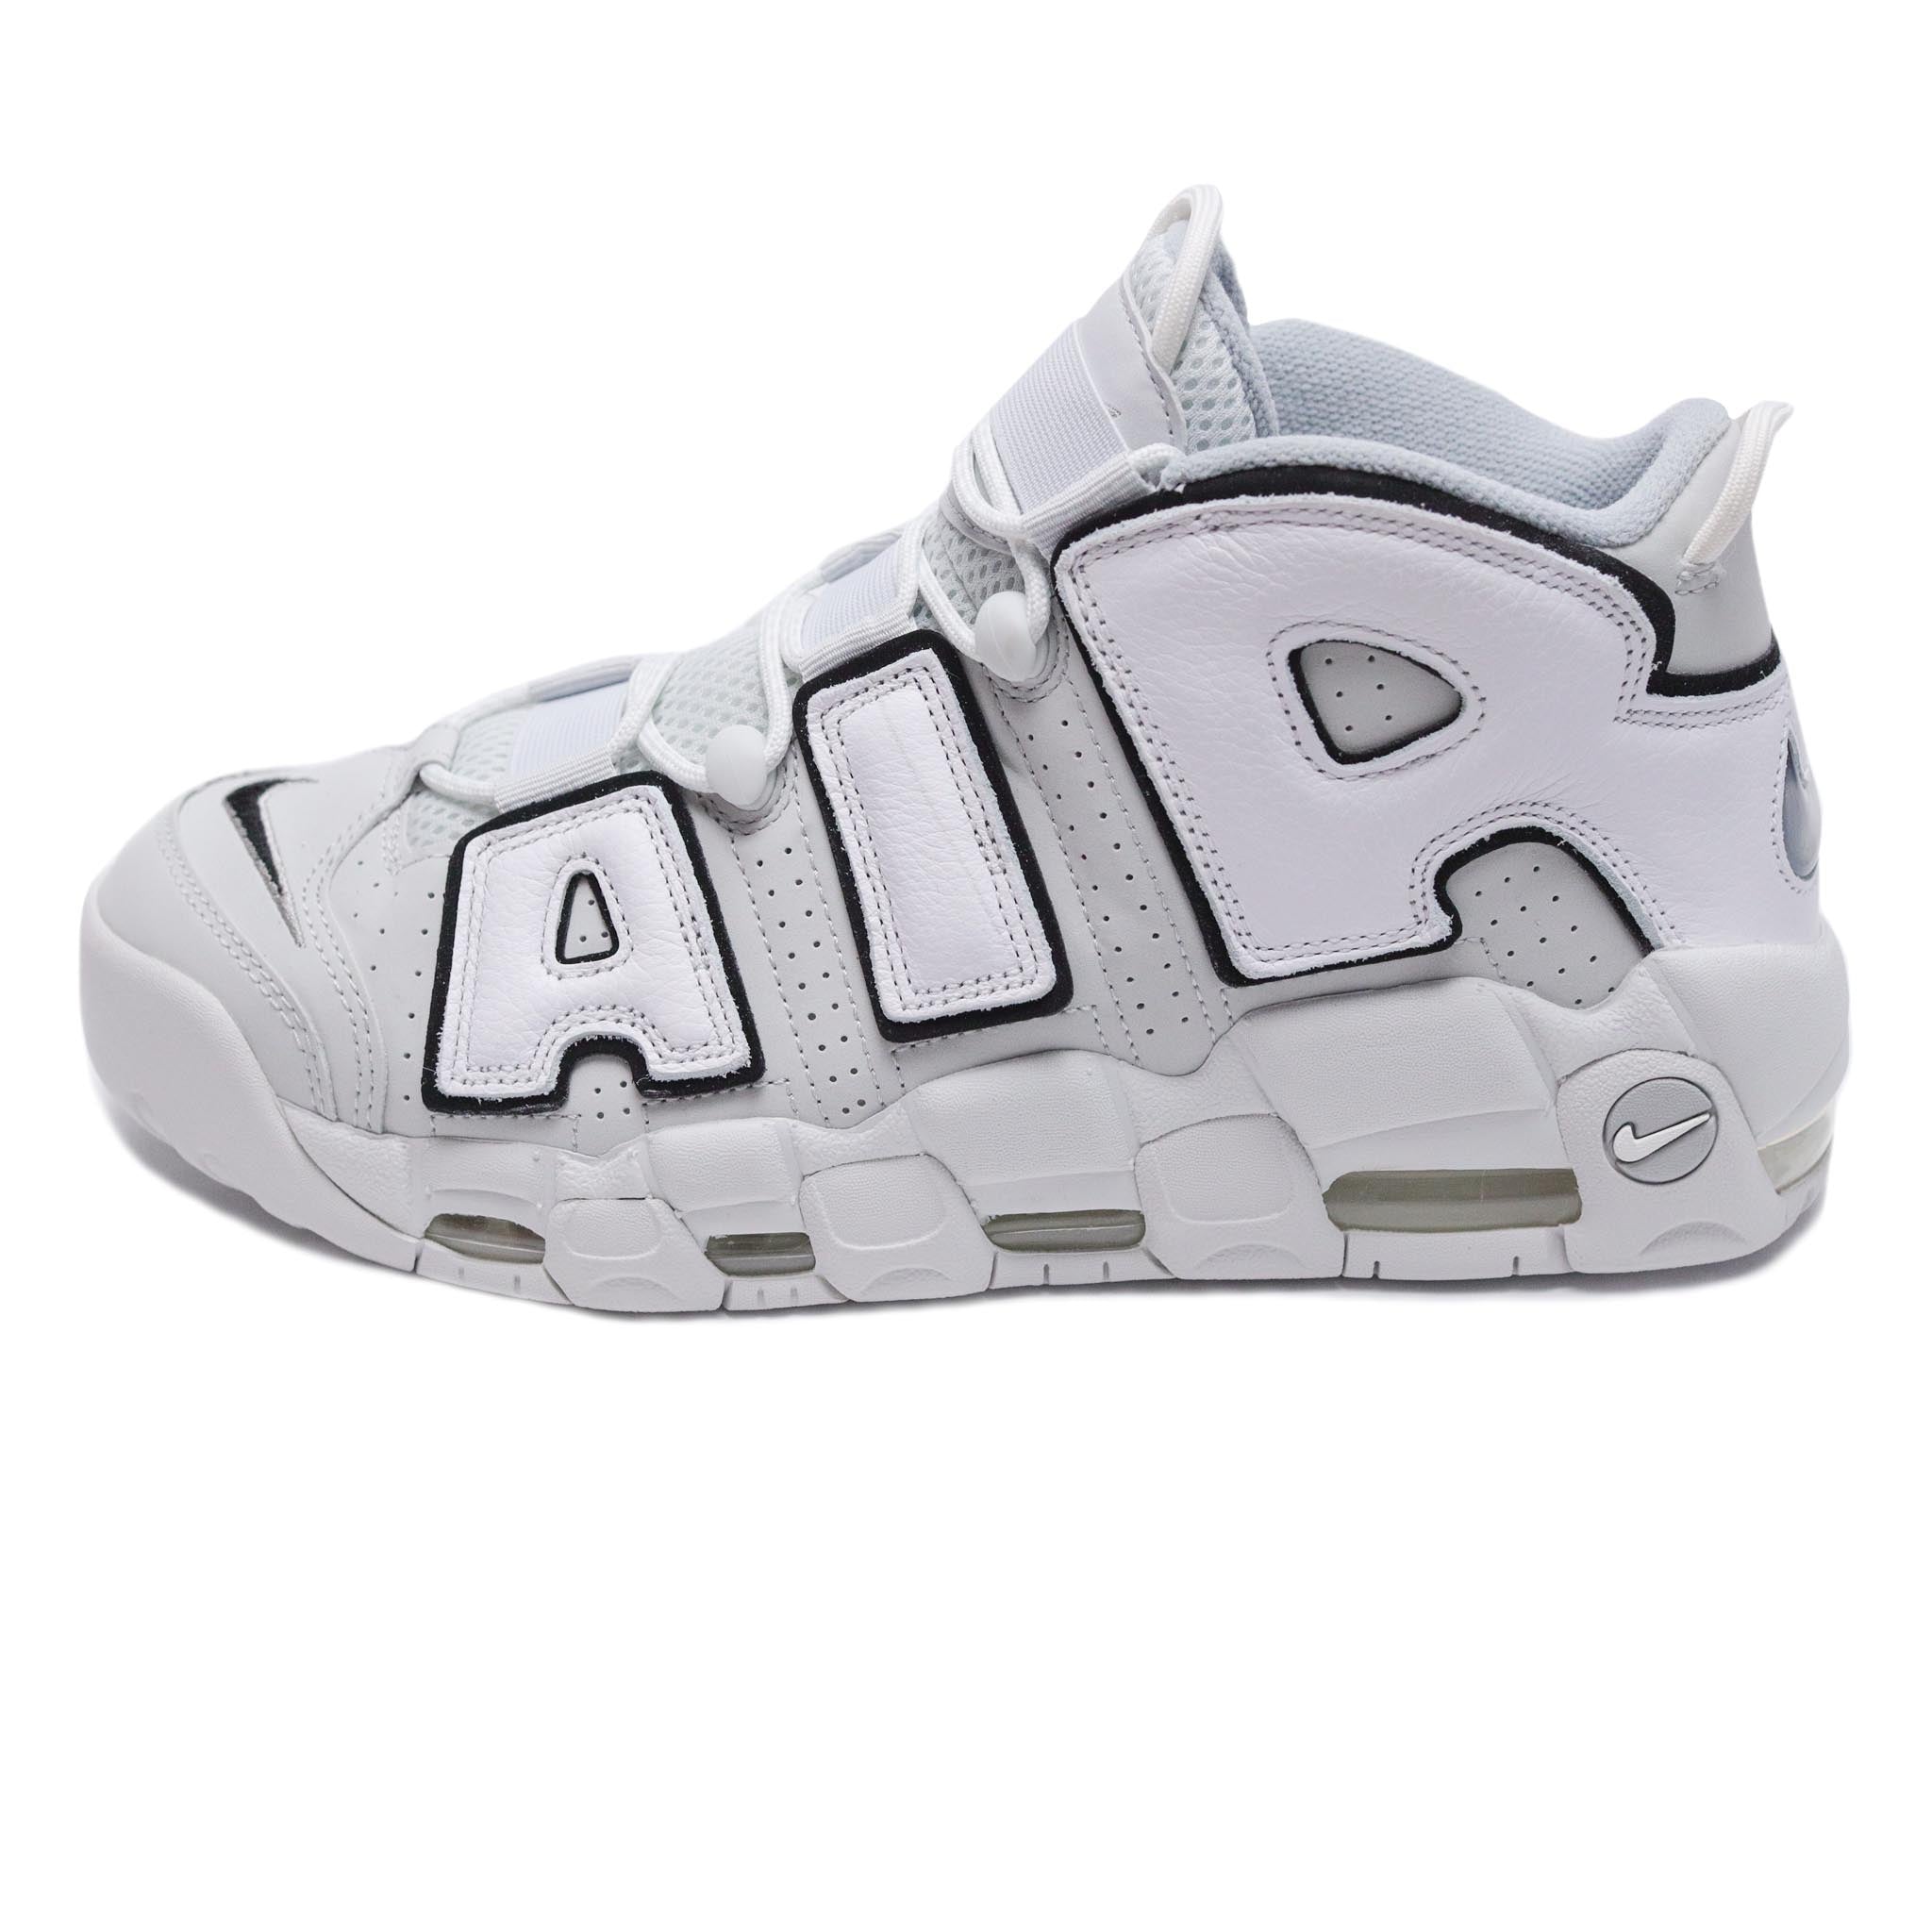 Nike Air More Uptempo '96 'Photon Dust' | SNEAKERBOX